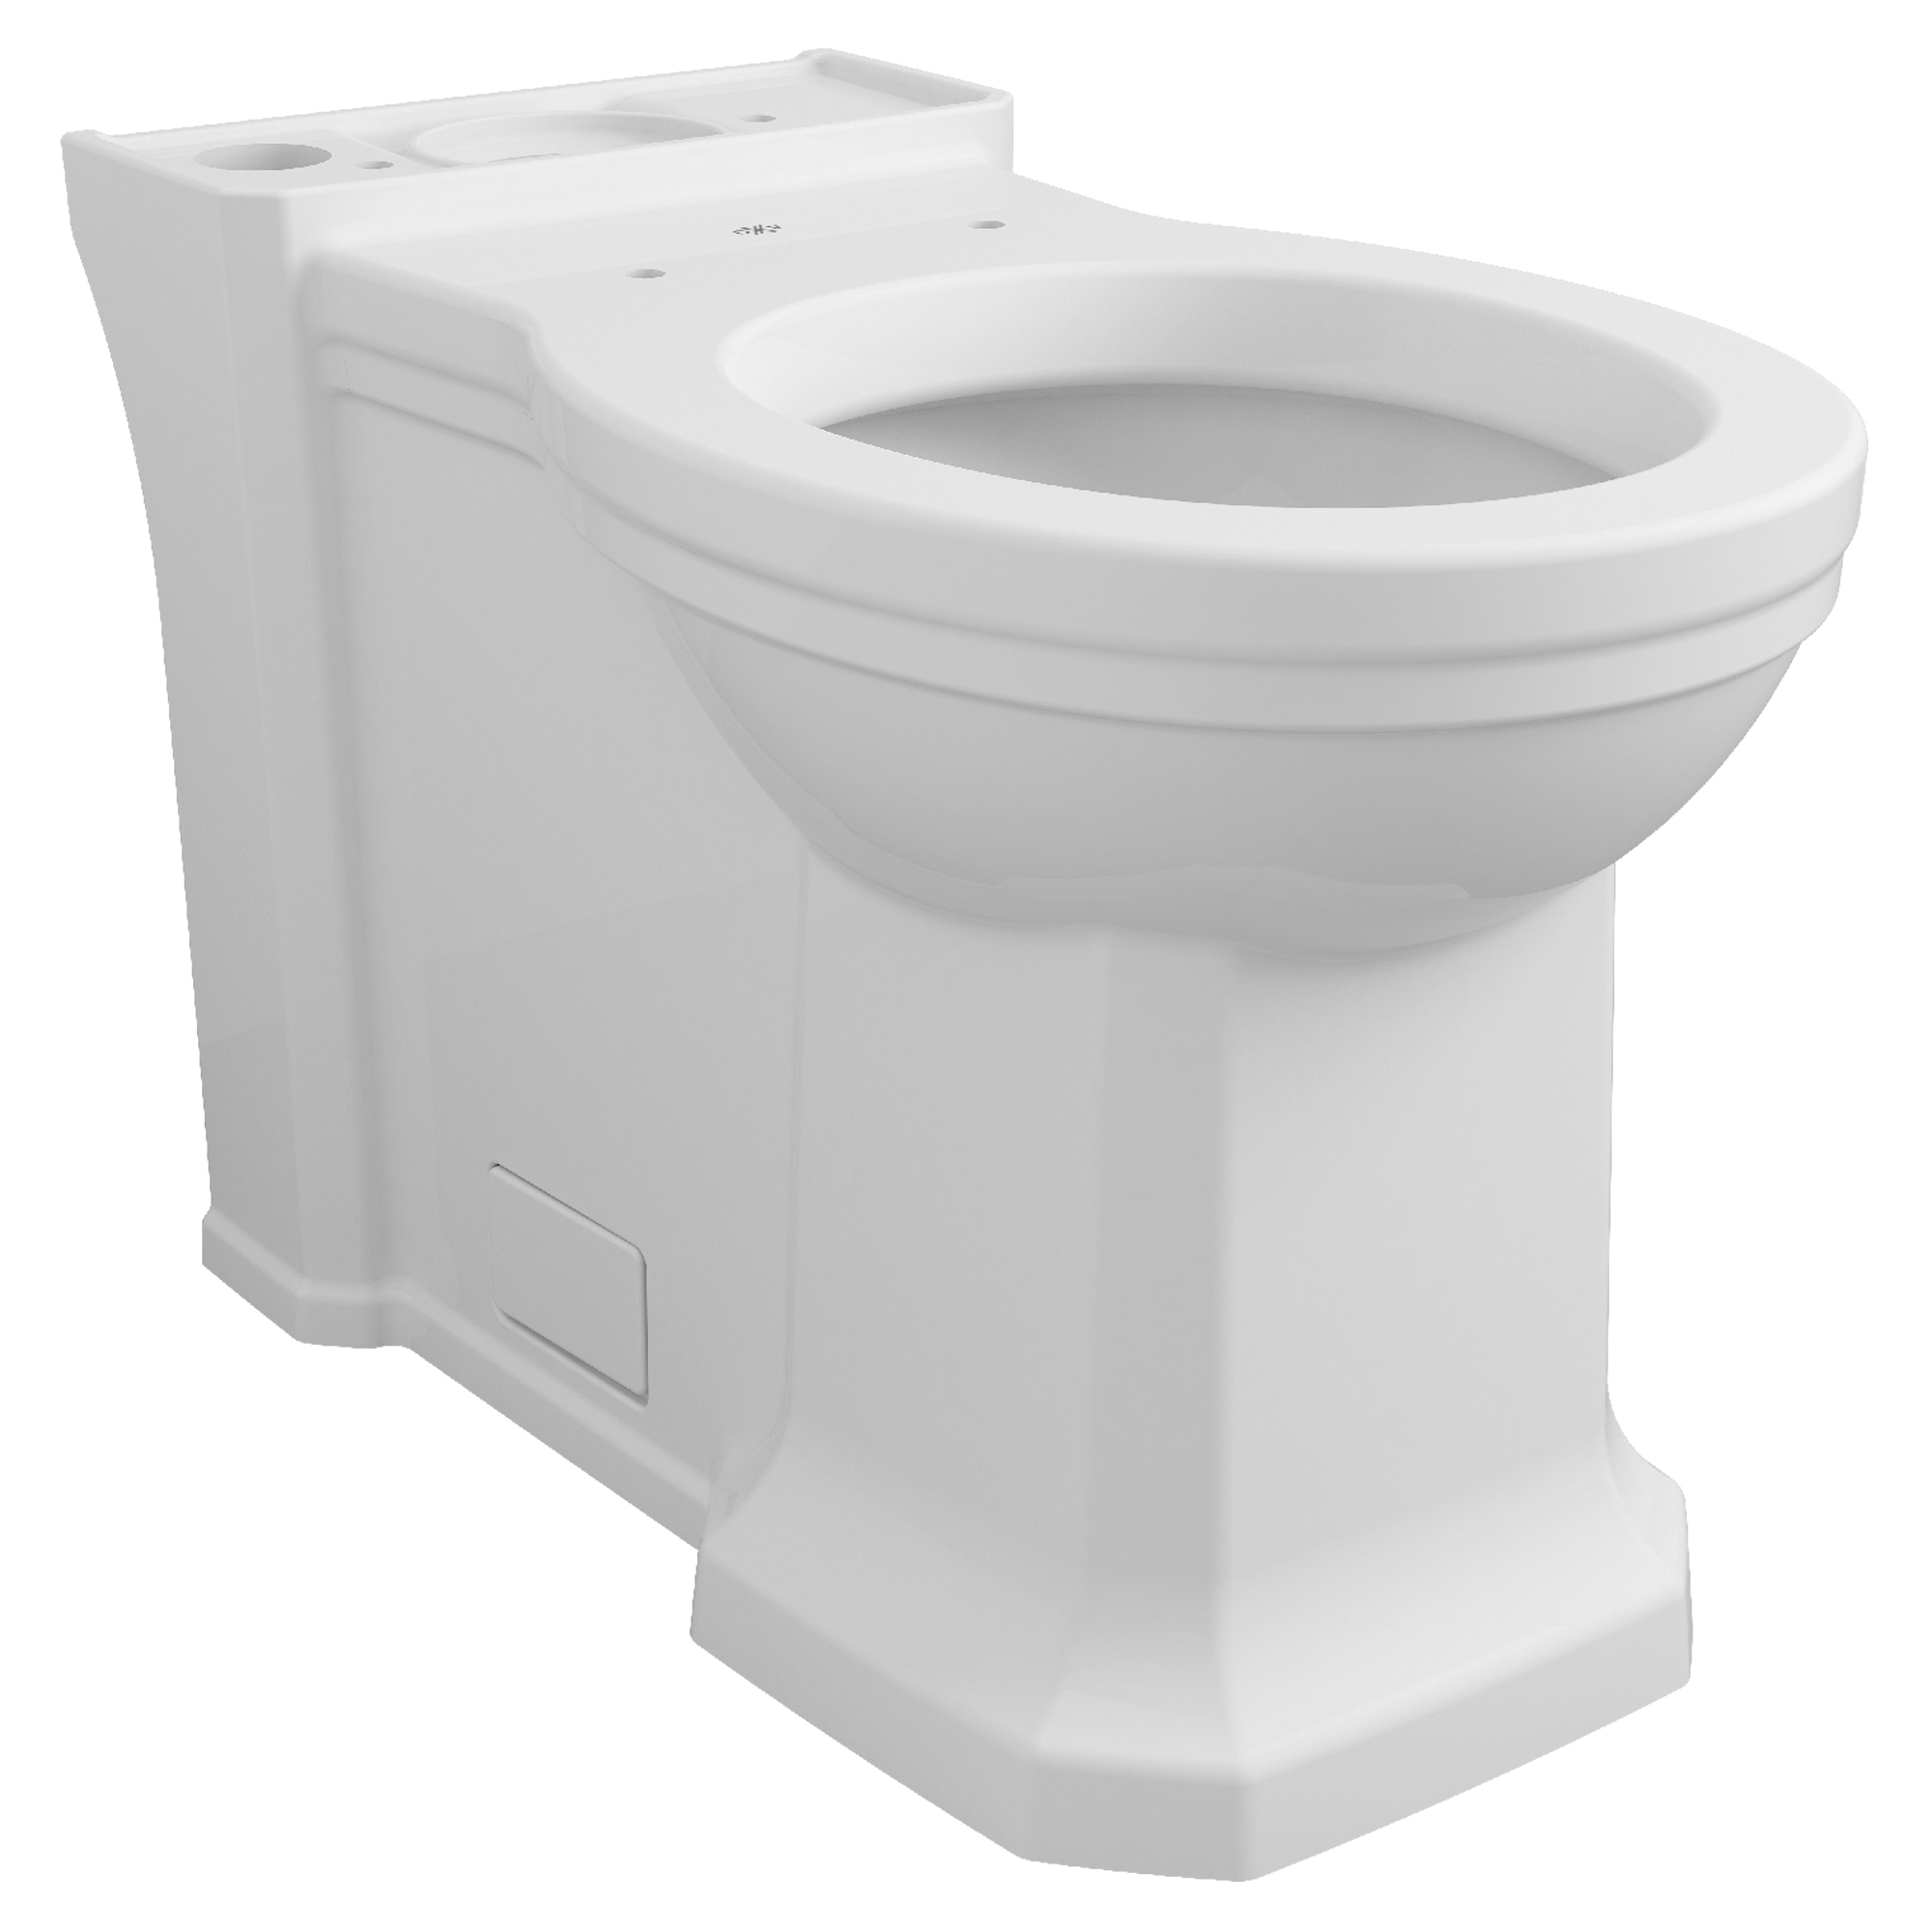 Fitzgerald® Chair-Height Elongated Toilet Bowl with Seat